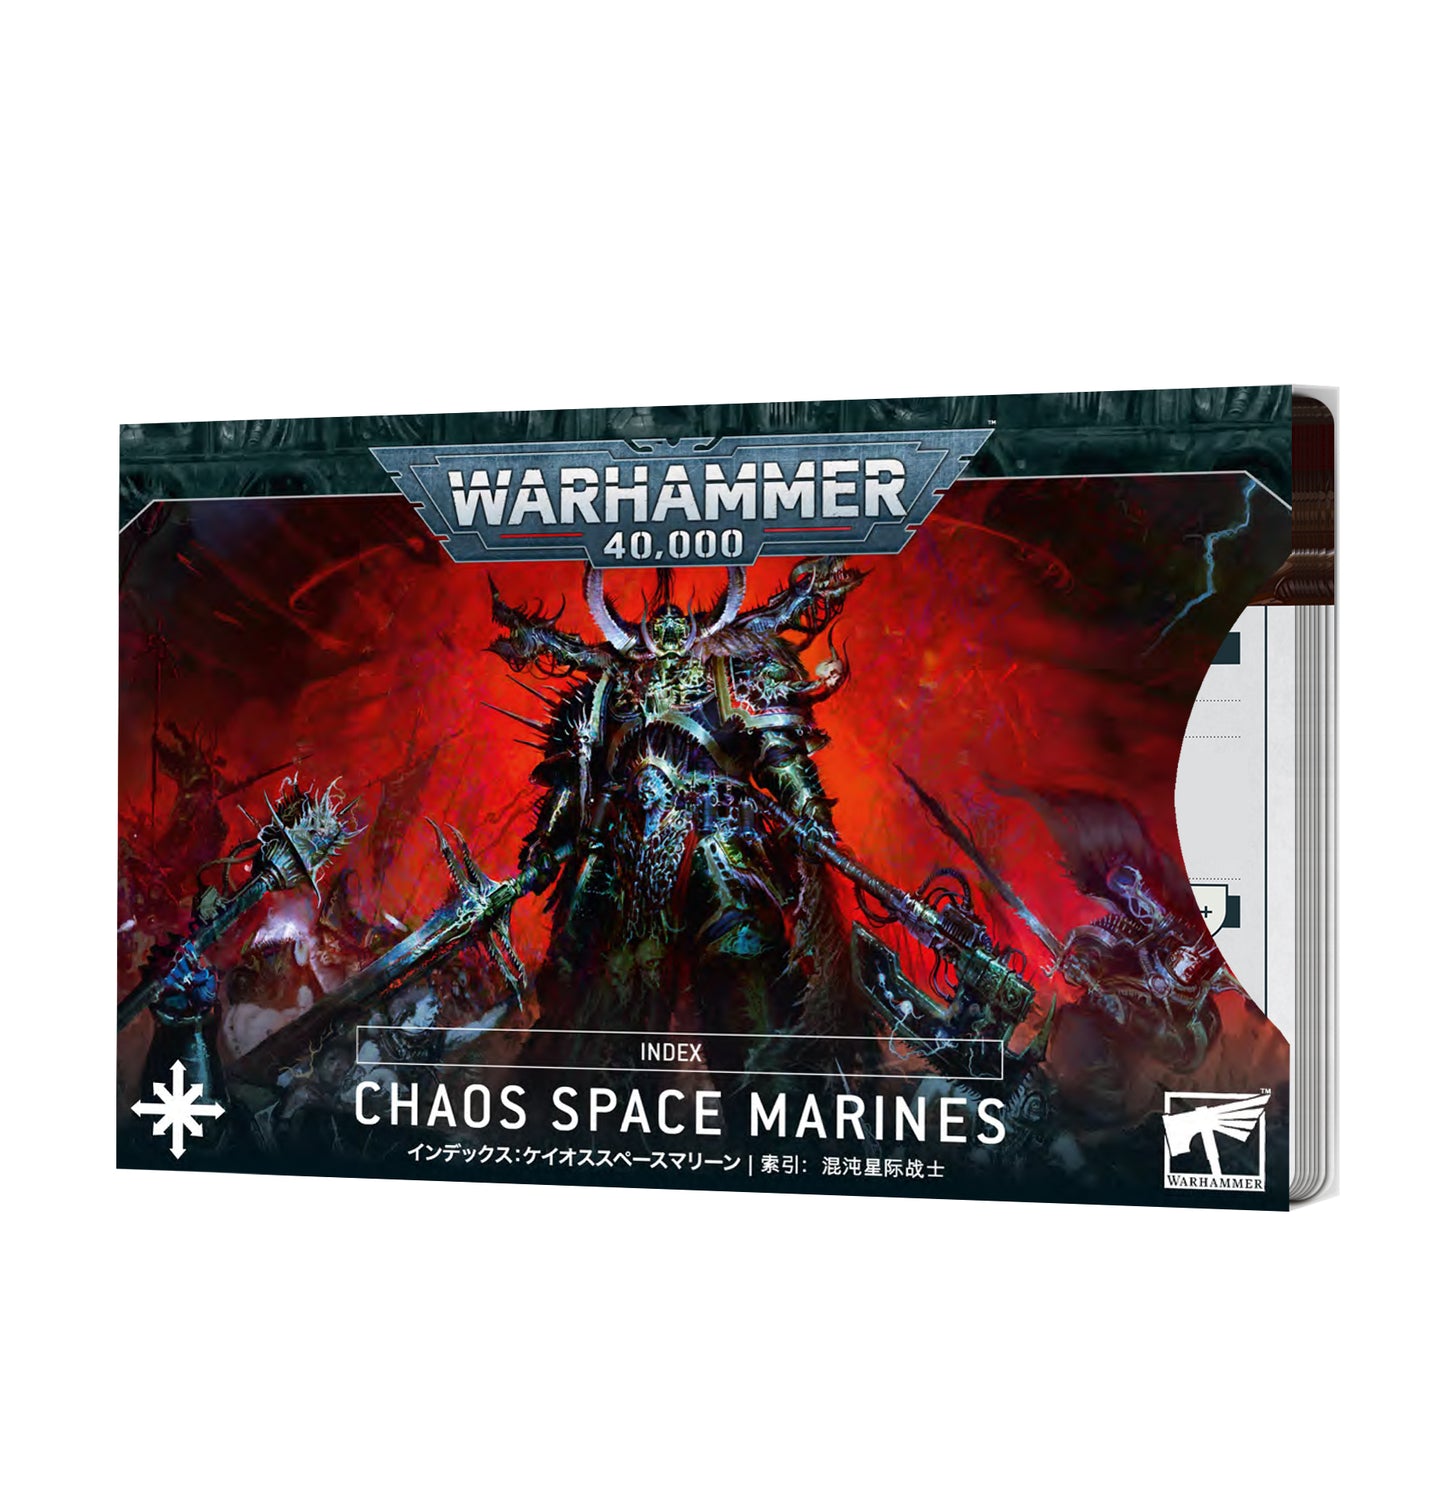 Chaos Space Marines Index Cards